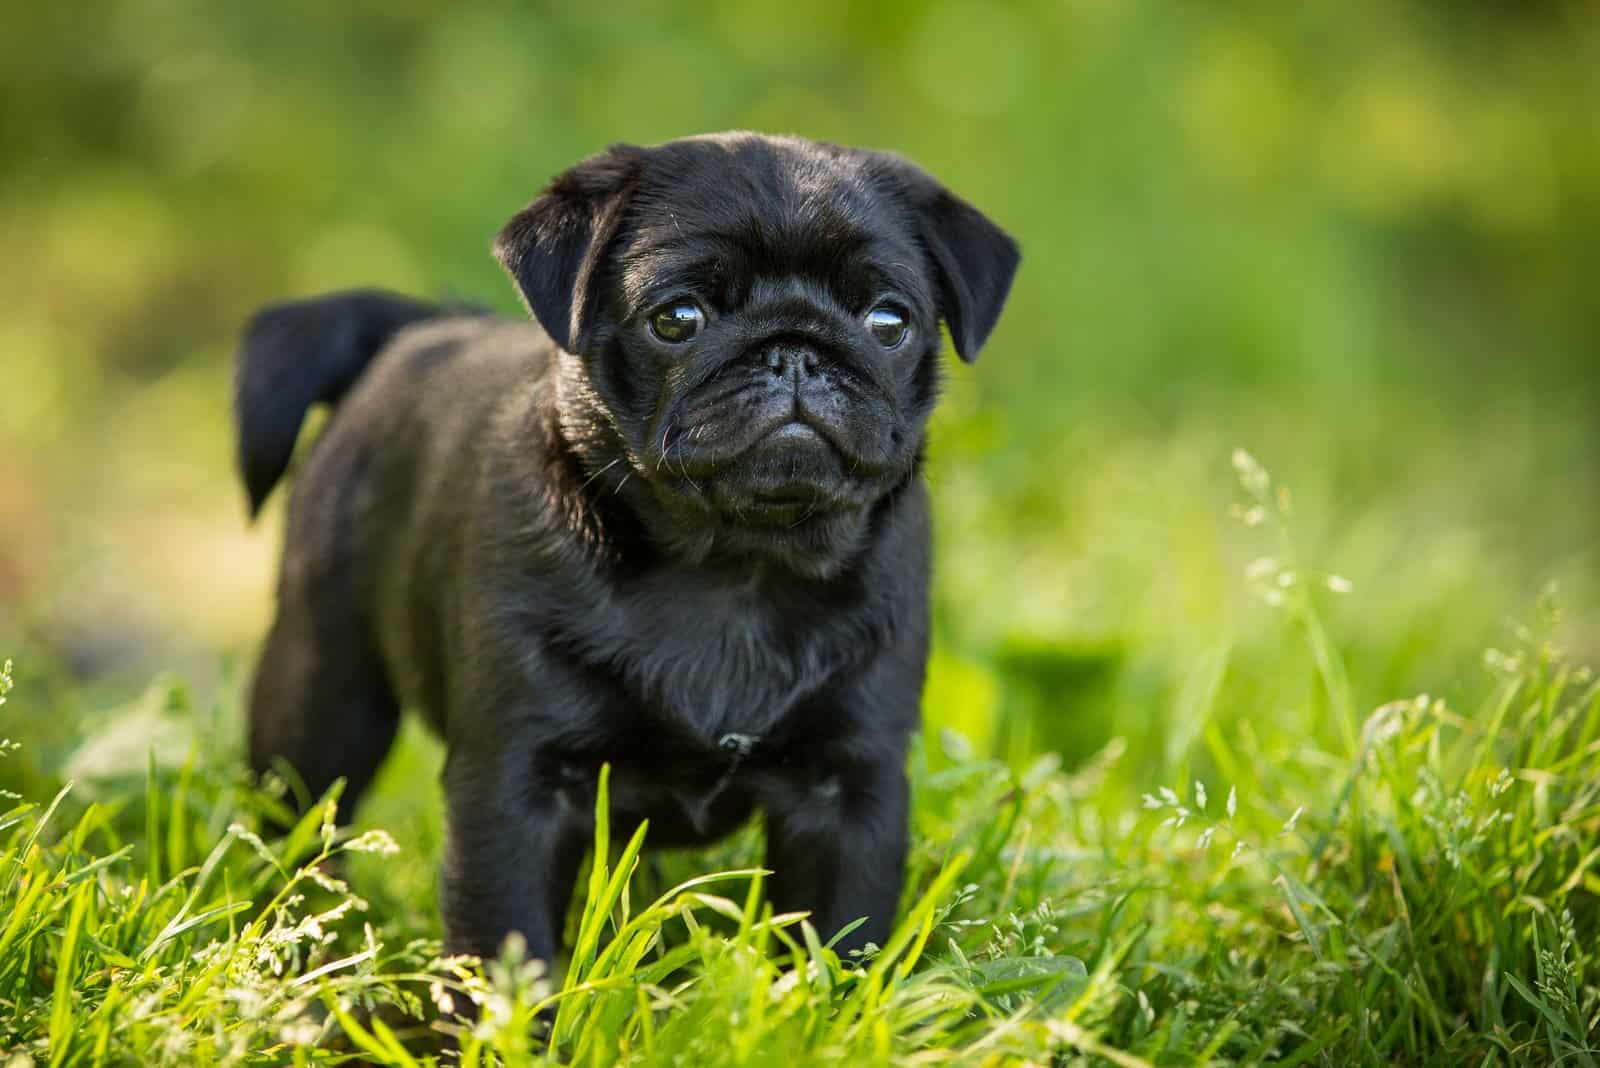 black pug dog standing in the grass